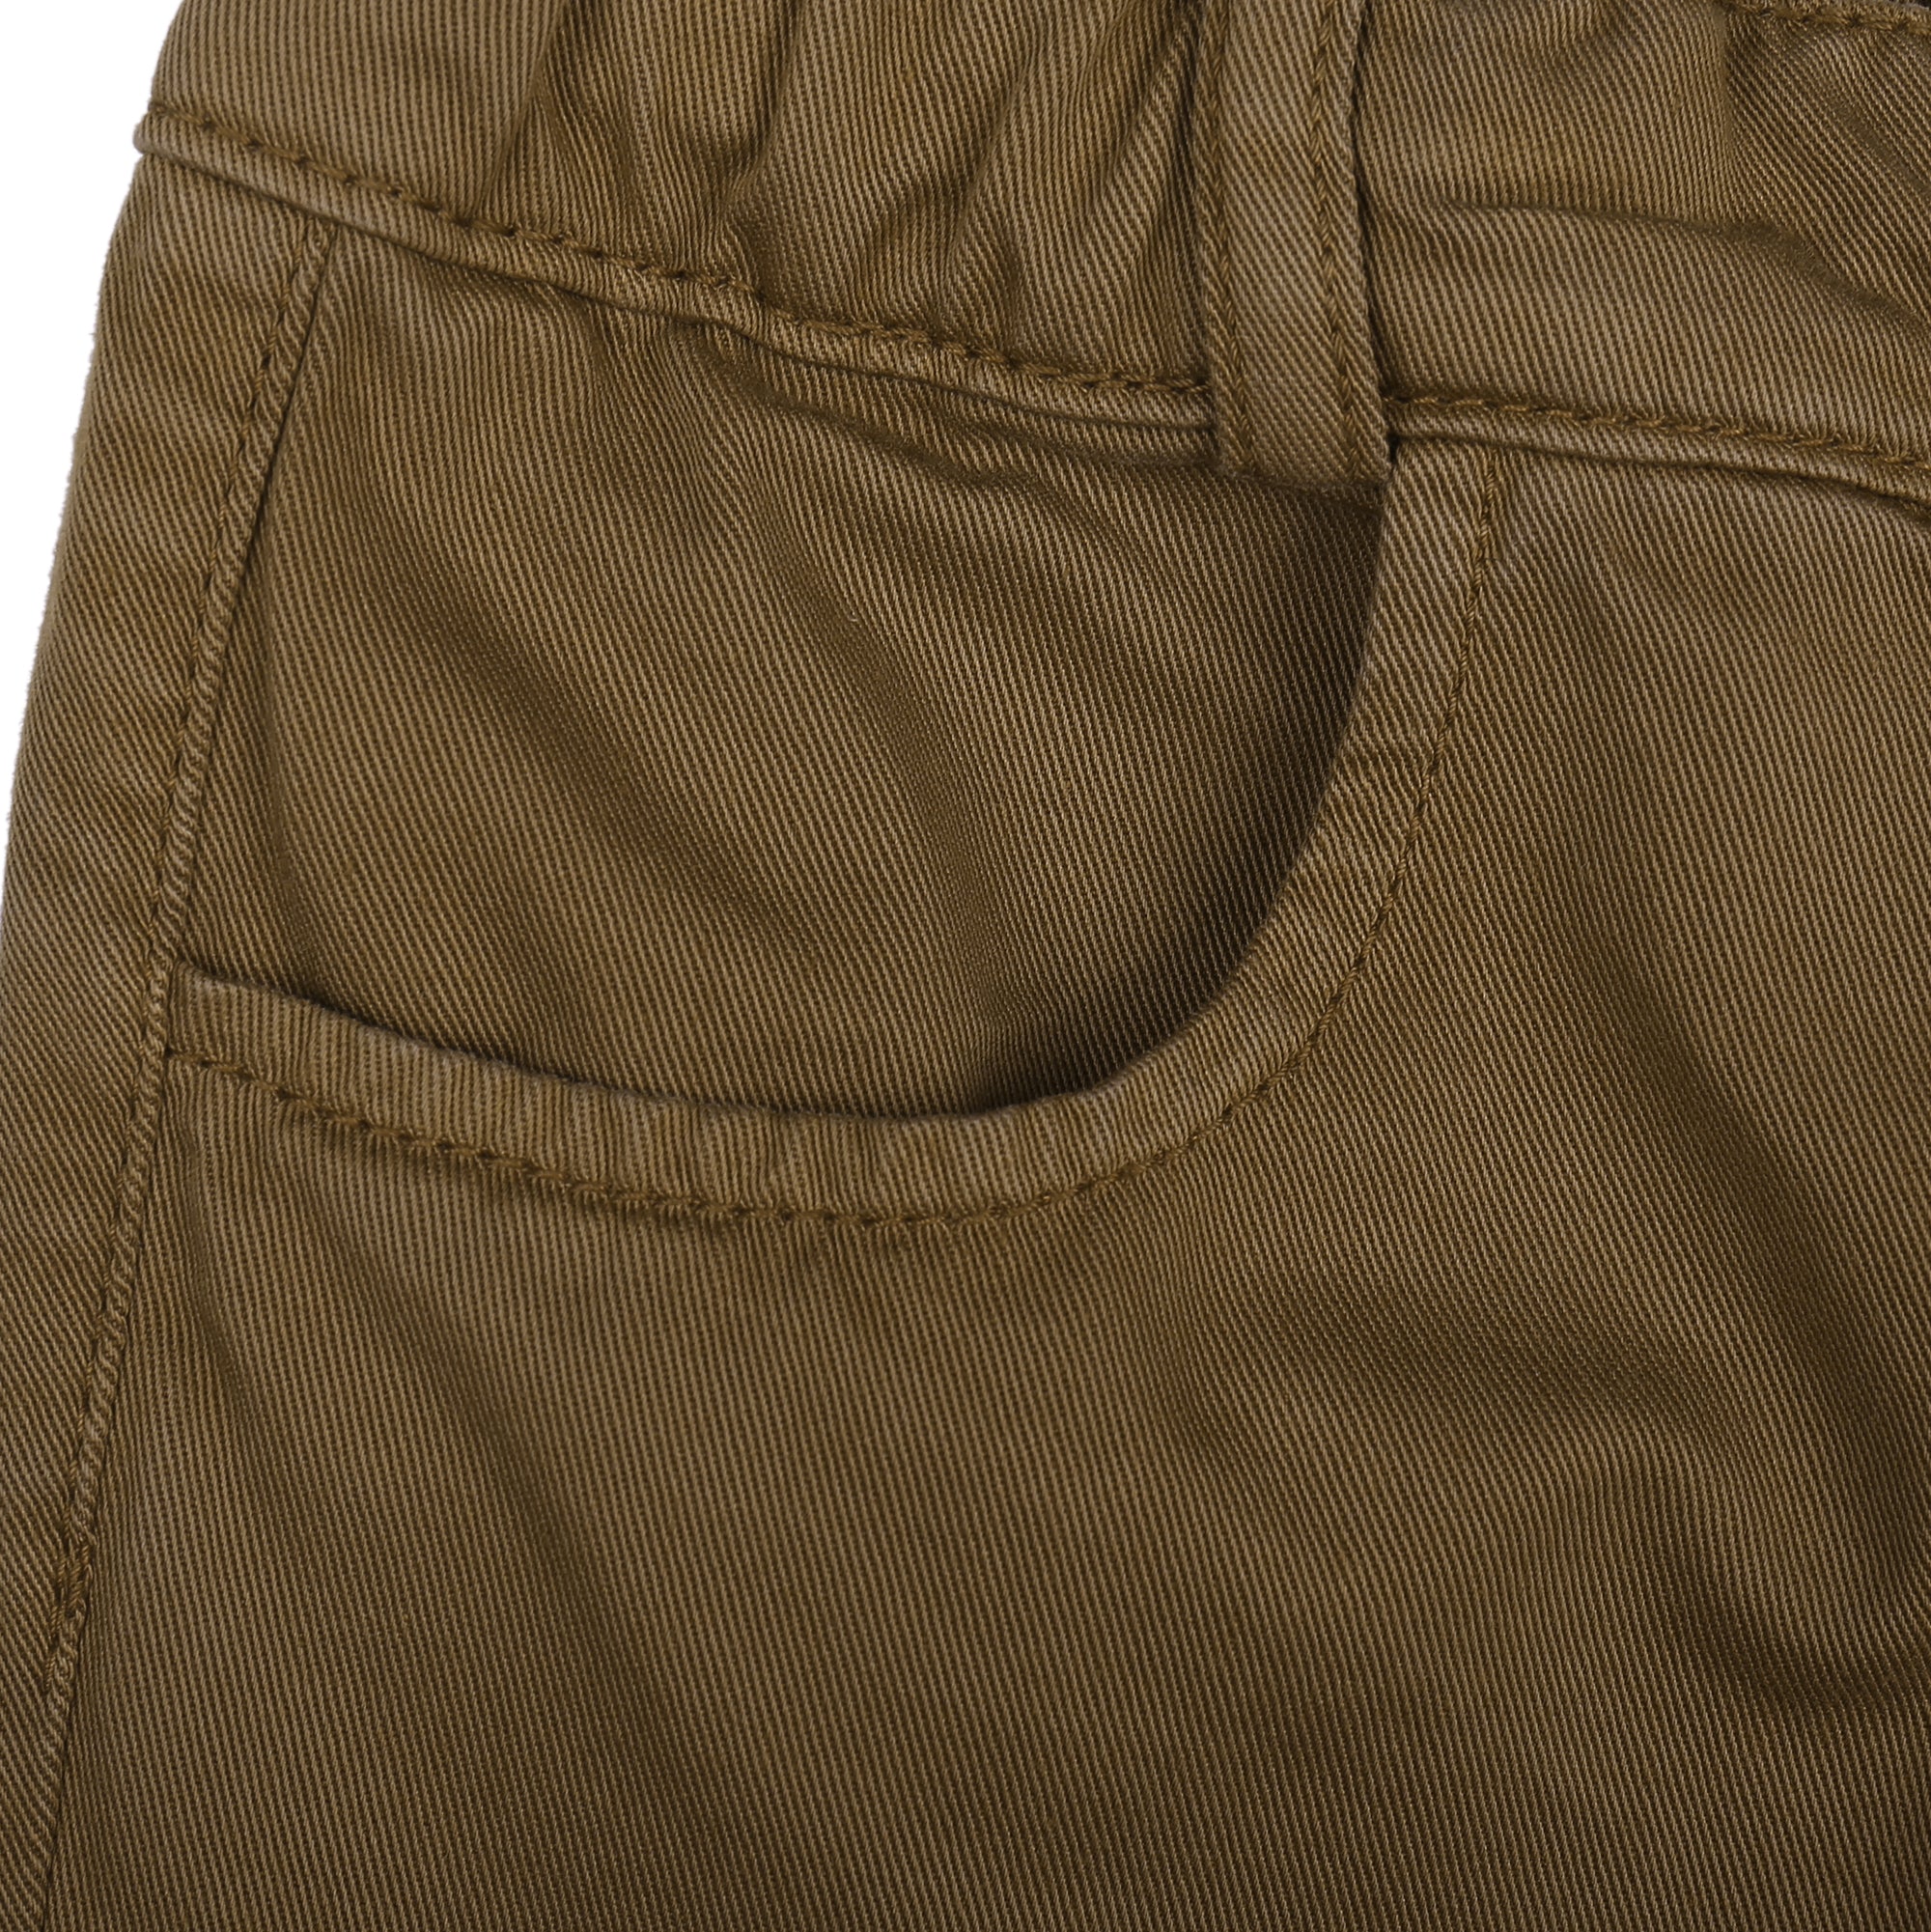 Boys Light Brown Woven Trousers